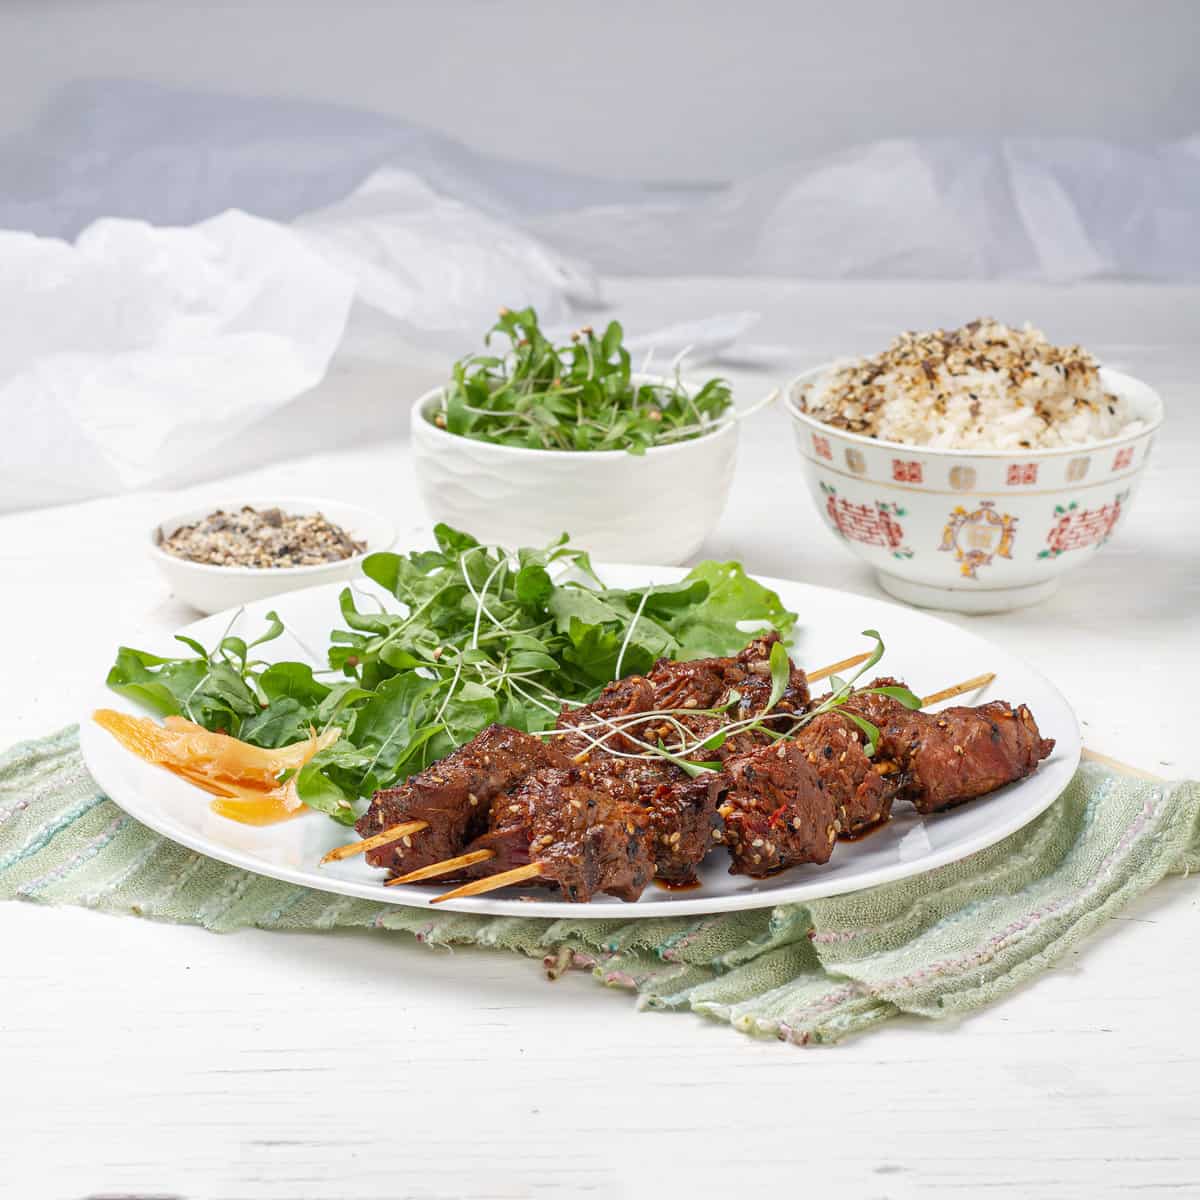 Green Tea Beef Kebabs plated with green salads